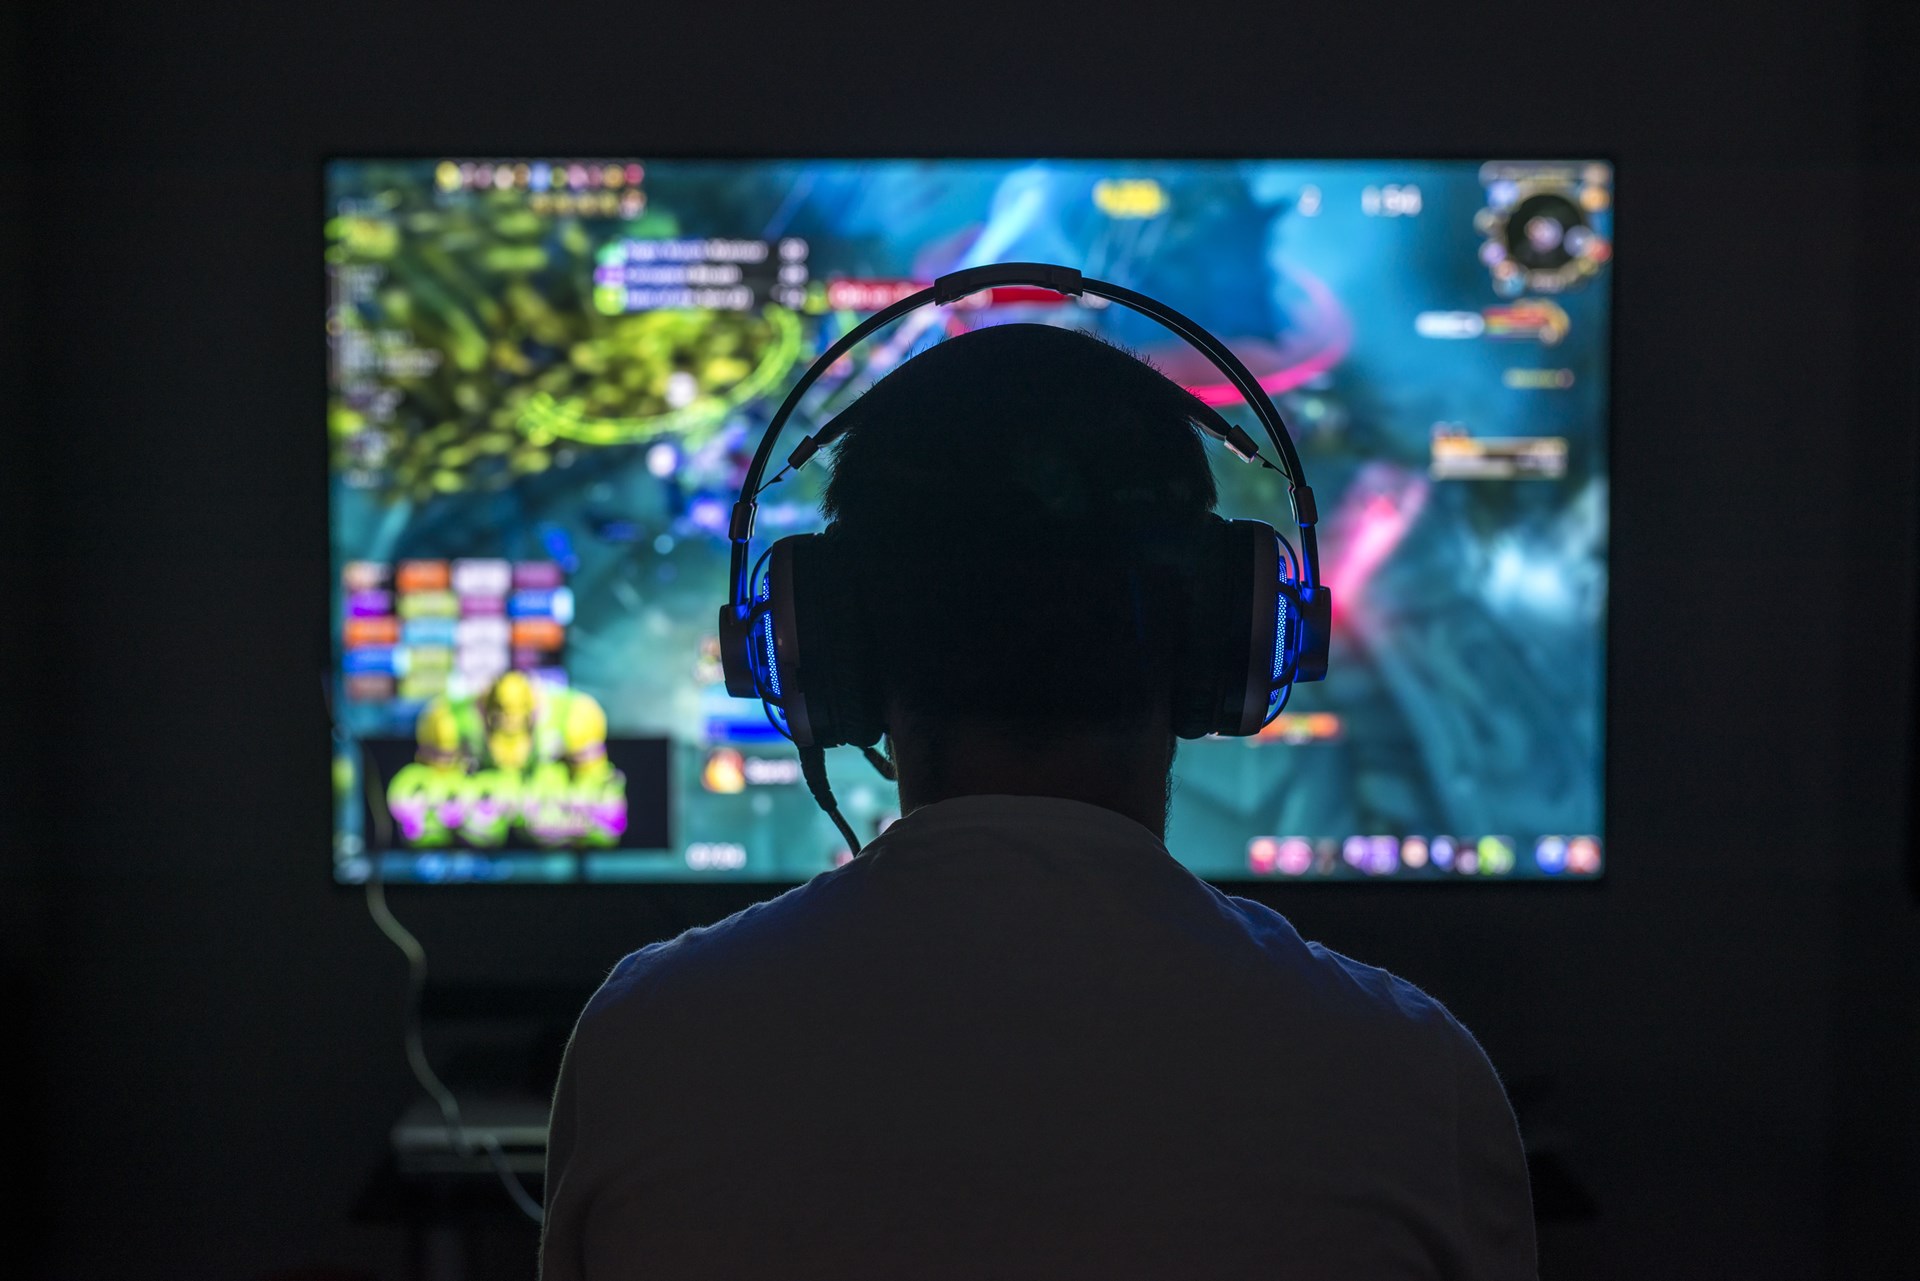 Gaming under the guise of sport has no place in our schools